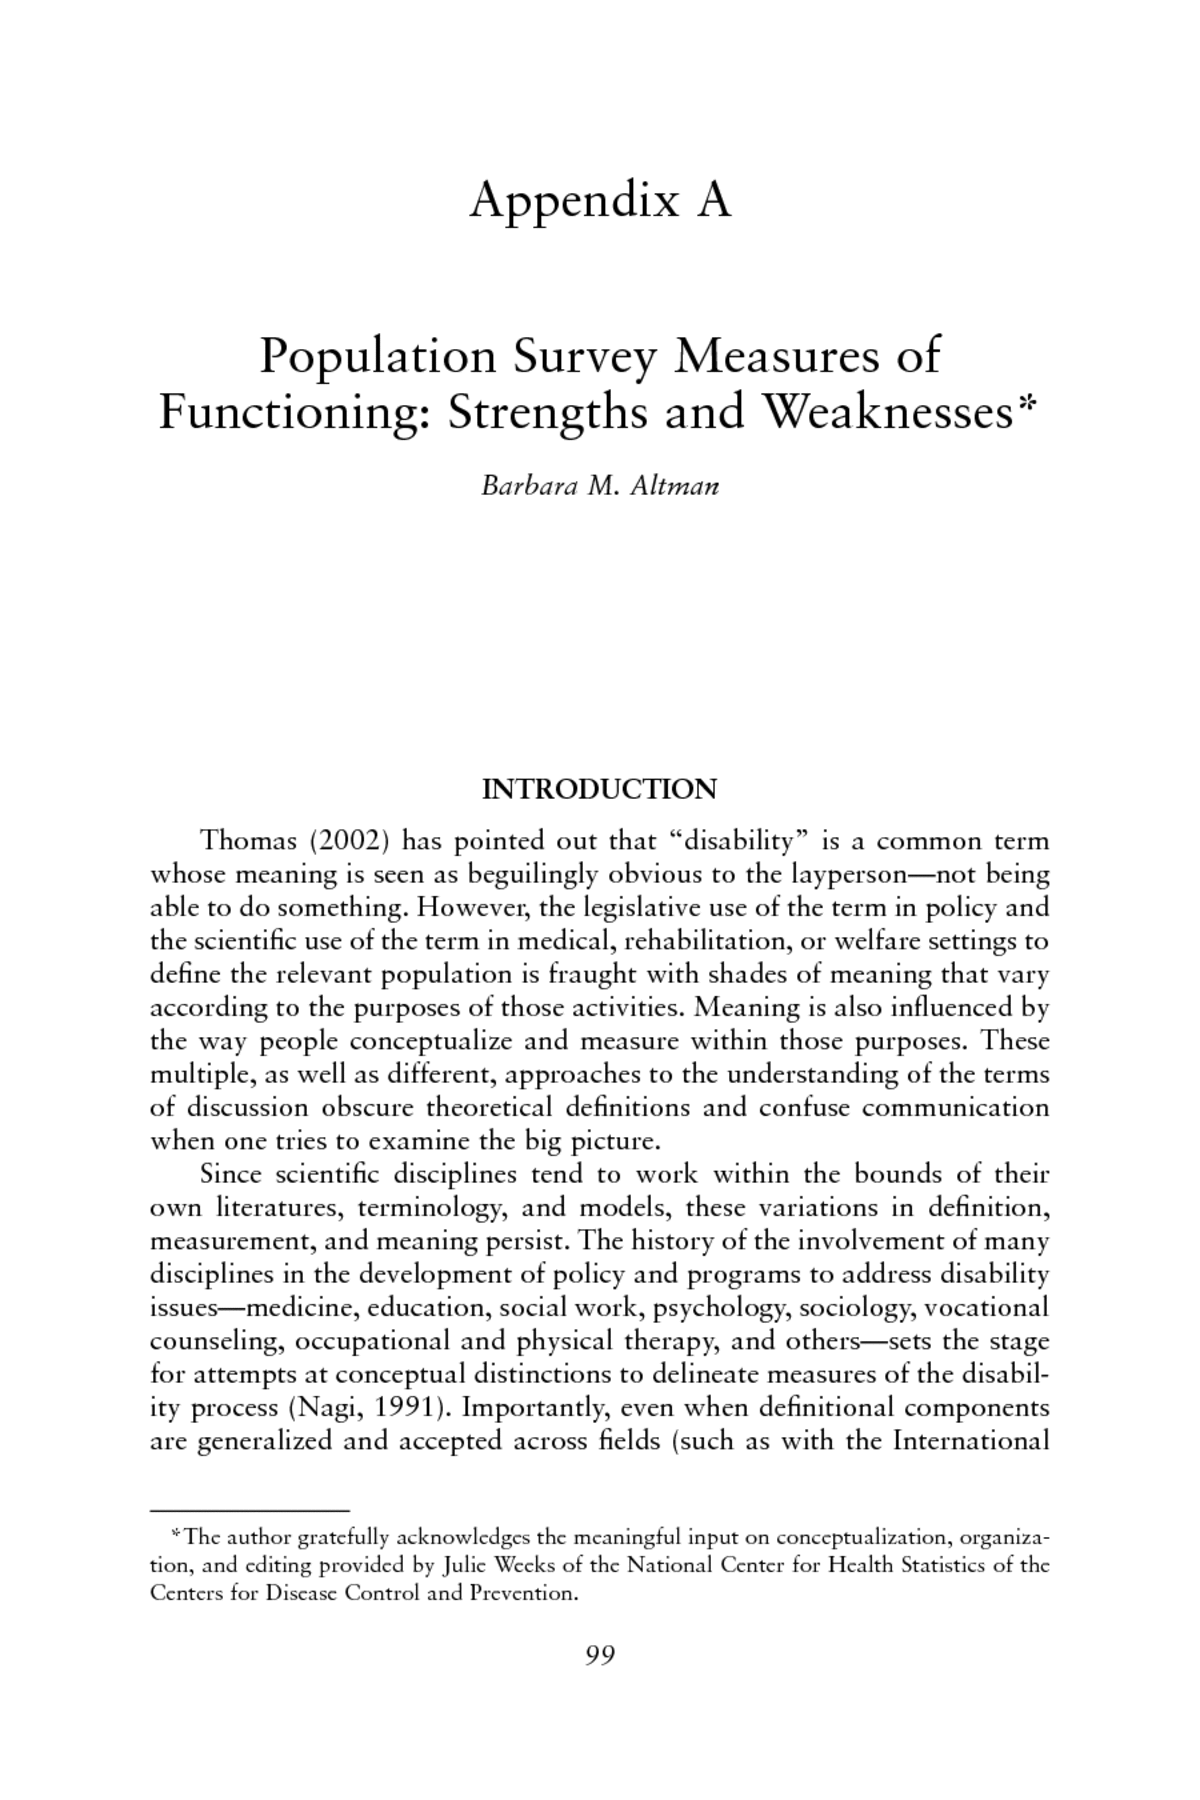 Research paper about population